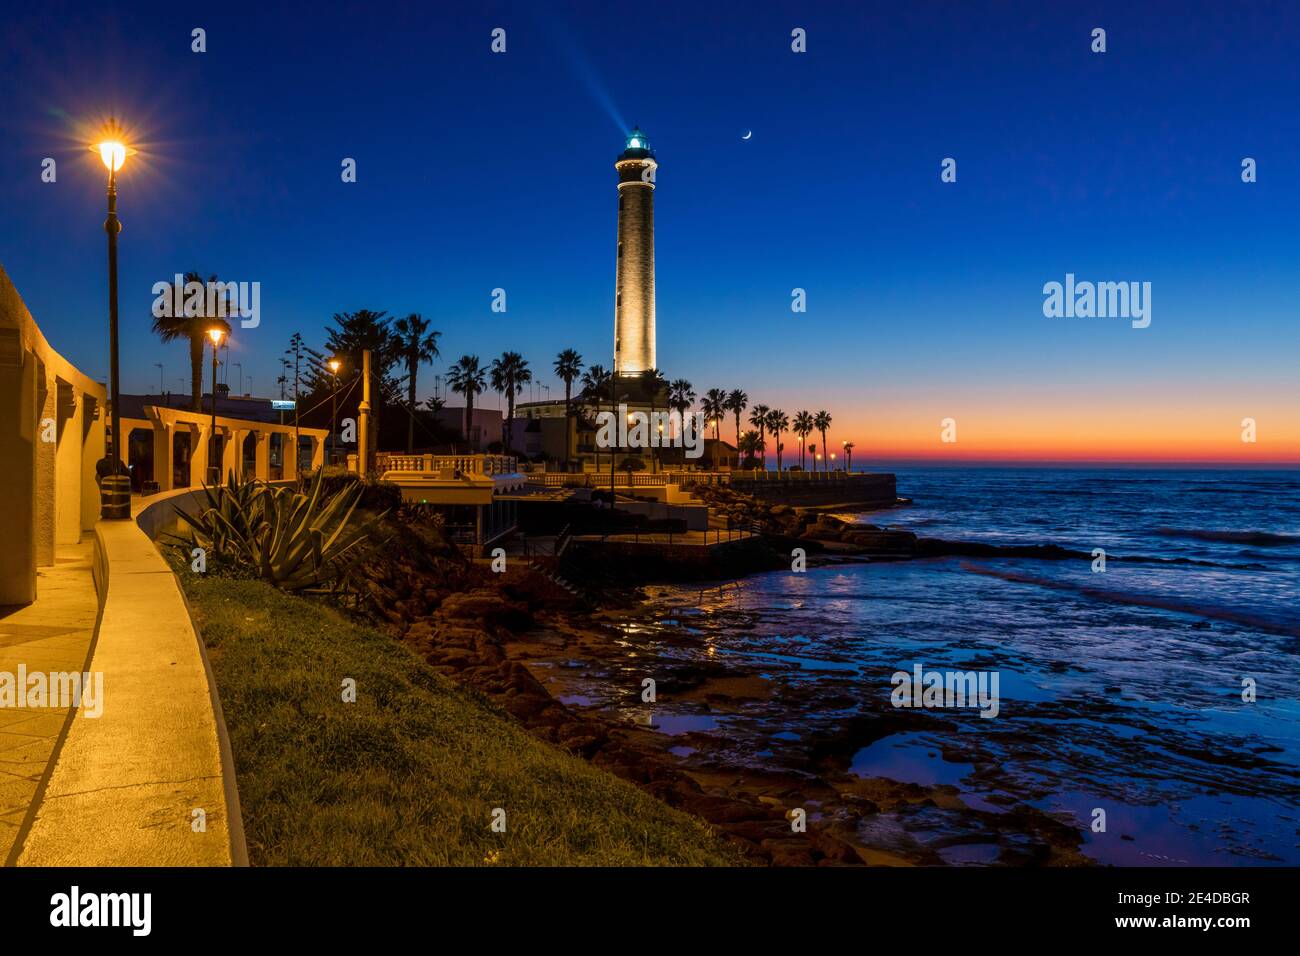 Chipiona, Spain - 15 January, 2020: view of the Chipiona lighthouse just after sunset Stock Photo